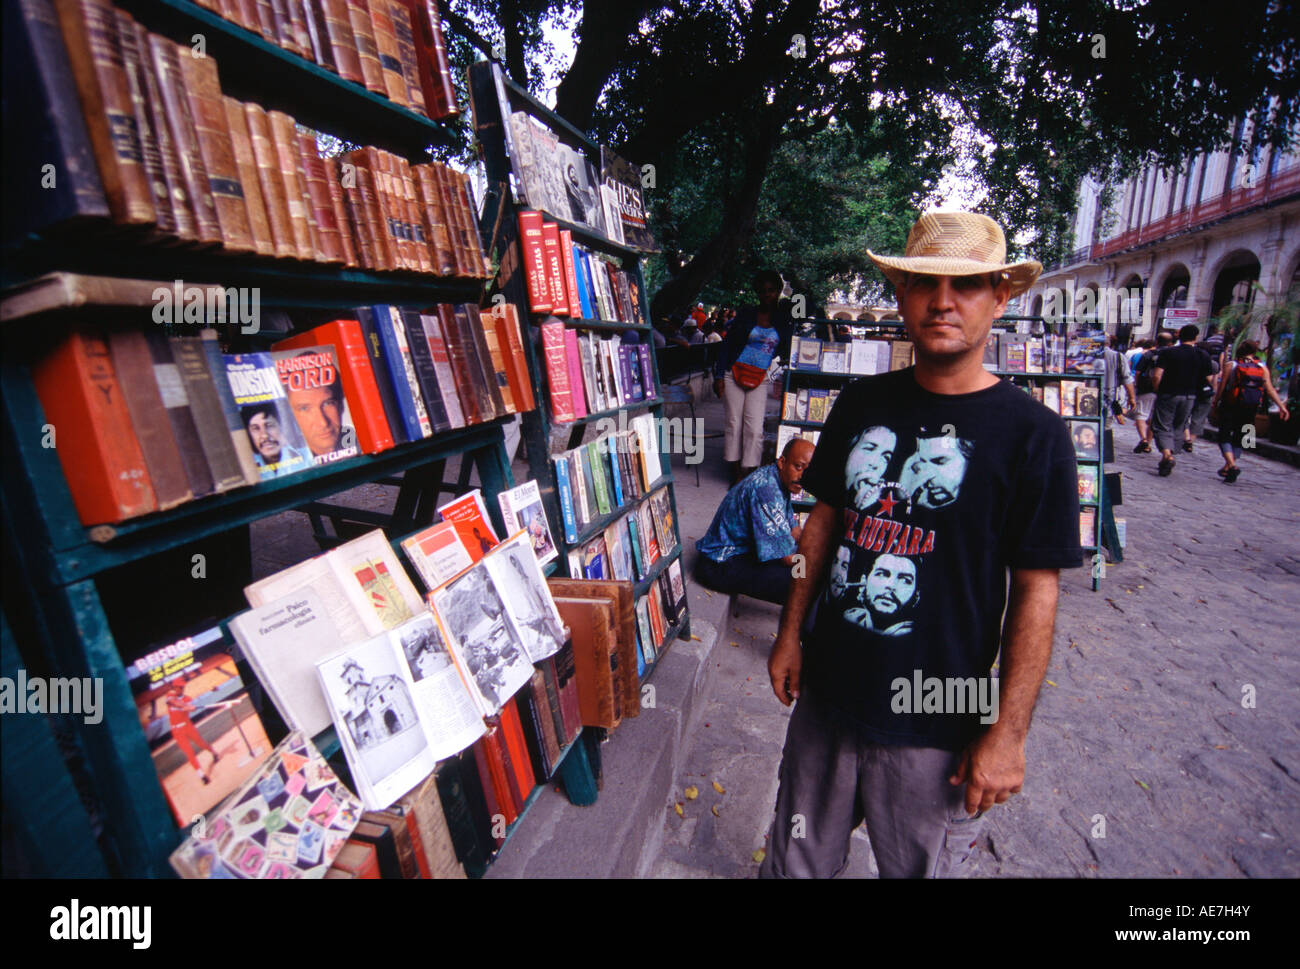 A man selling used books in Havana Cuba Man wearing a Che Guevara t shirt Che Guevara photos are best selling images for clothin Stock Photo